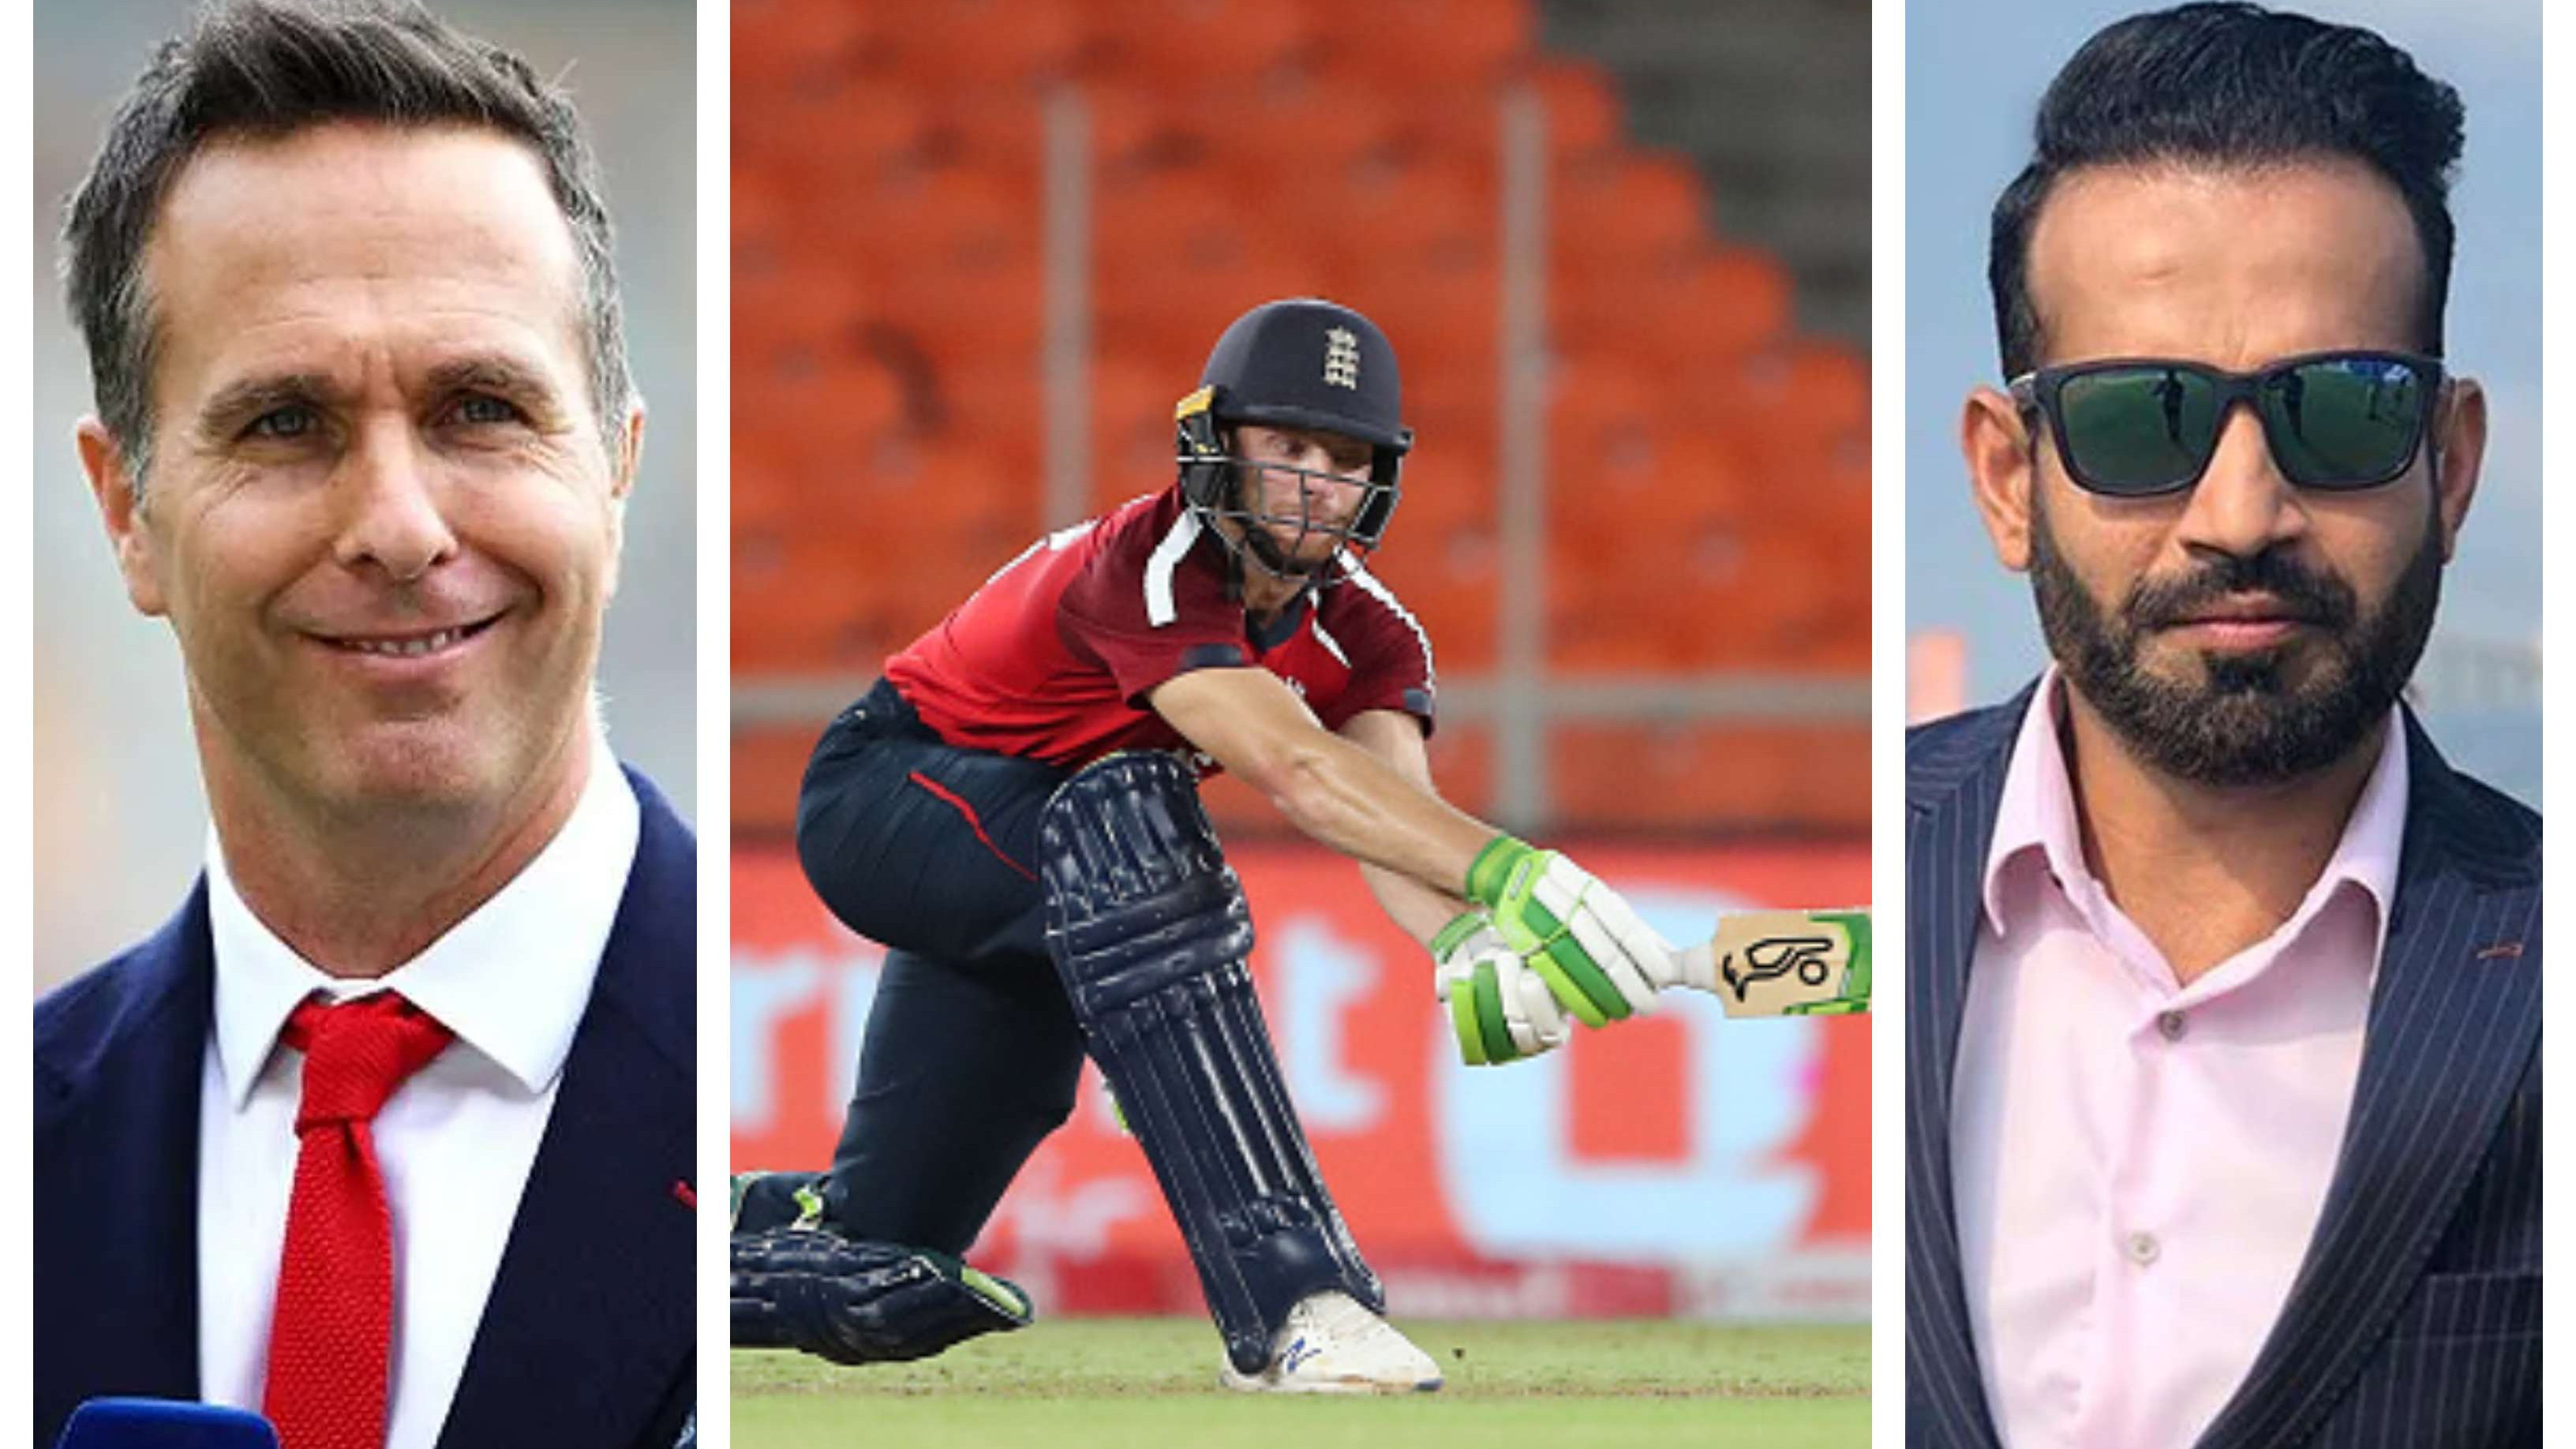 IND v ENG 2021: Cricket fraternity reacts as Jos Buttler’s unbeaten 83 powers England to 8-wicket win in 3rd T20I